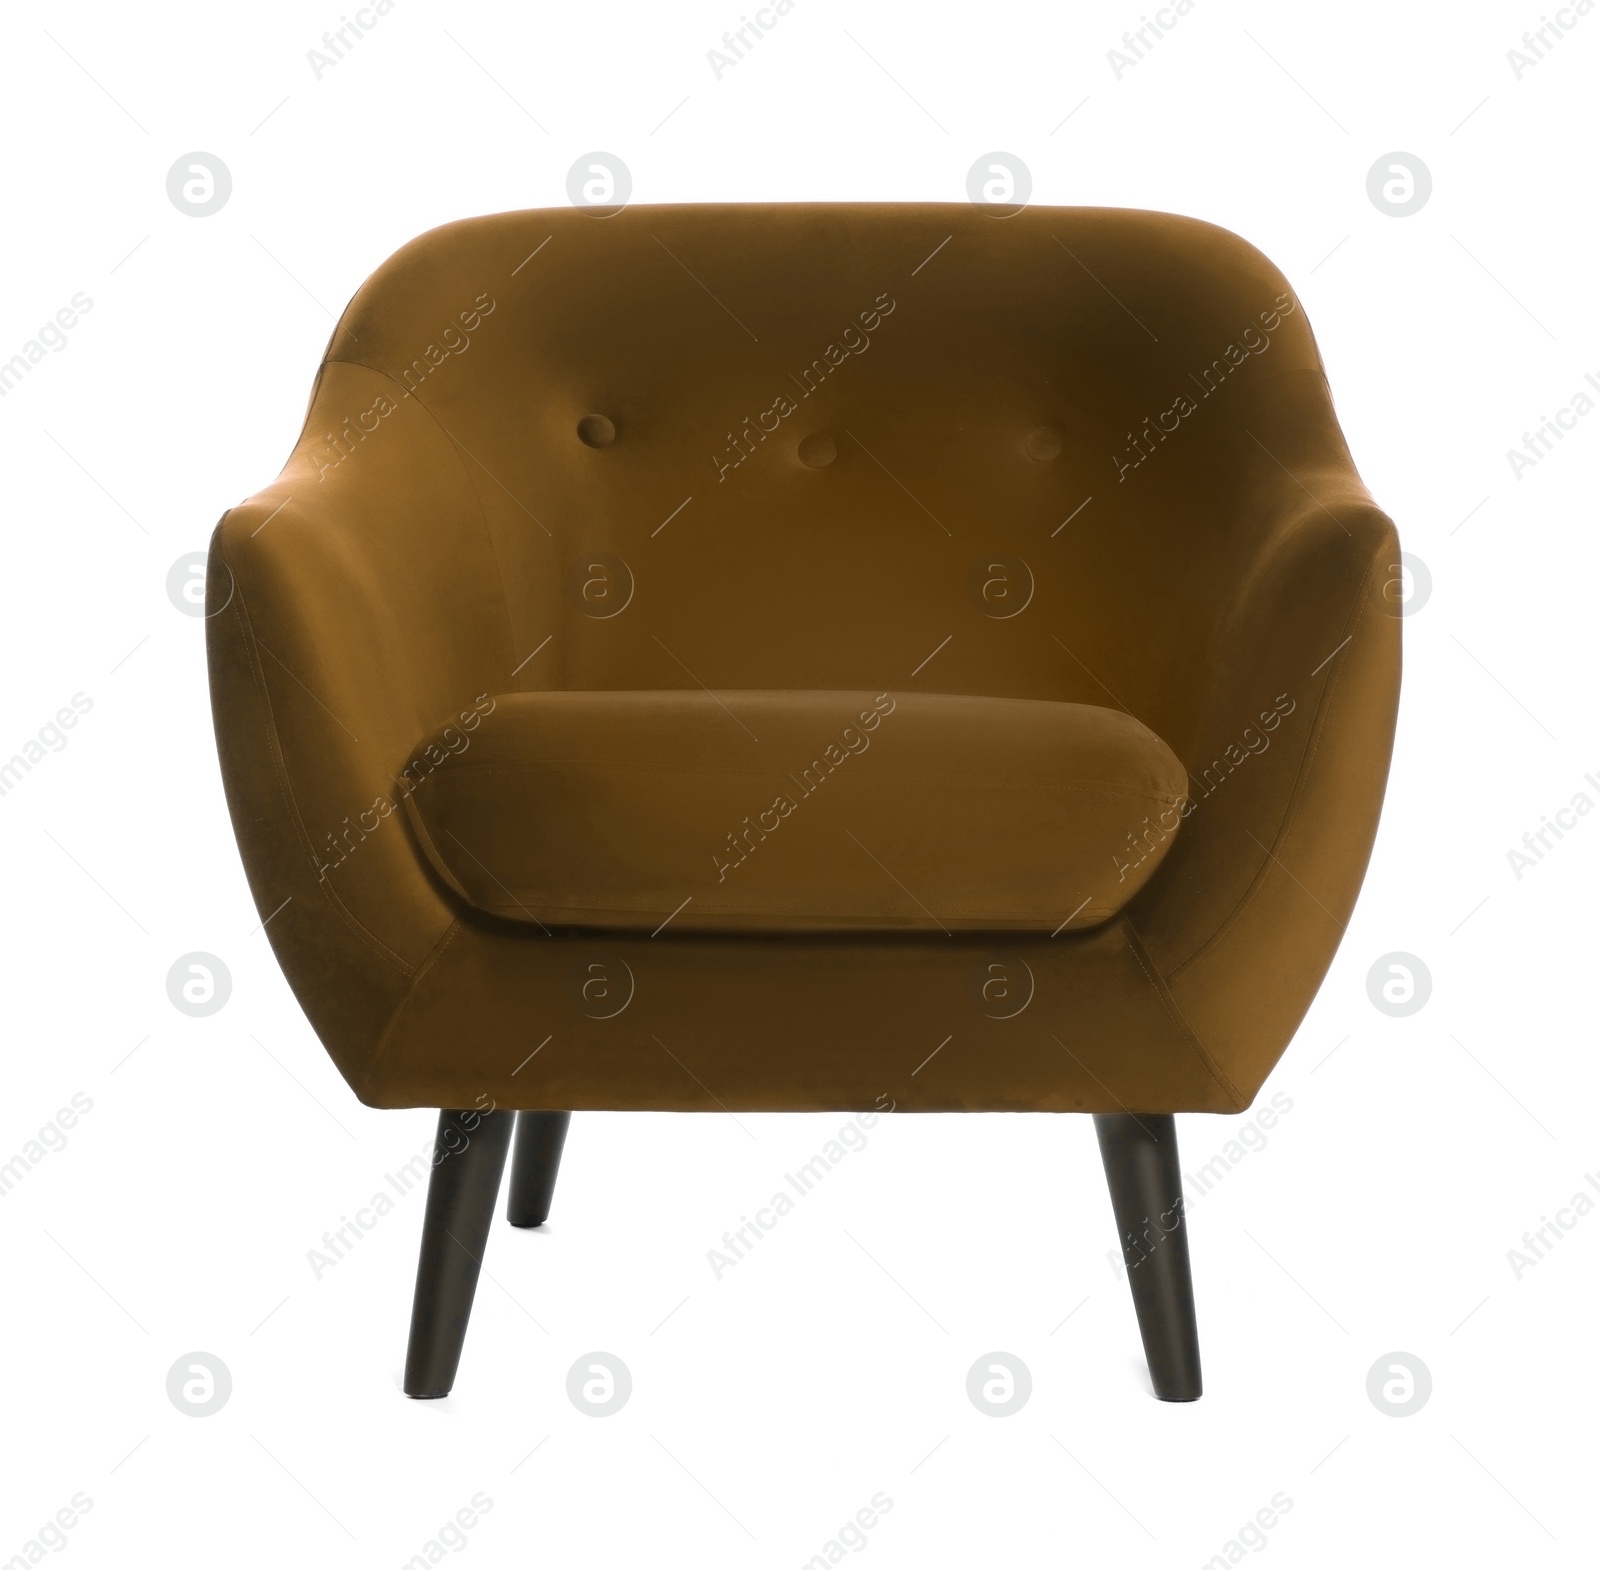 Image of One comfortable olive brown armchair isolated on white